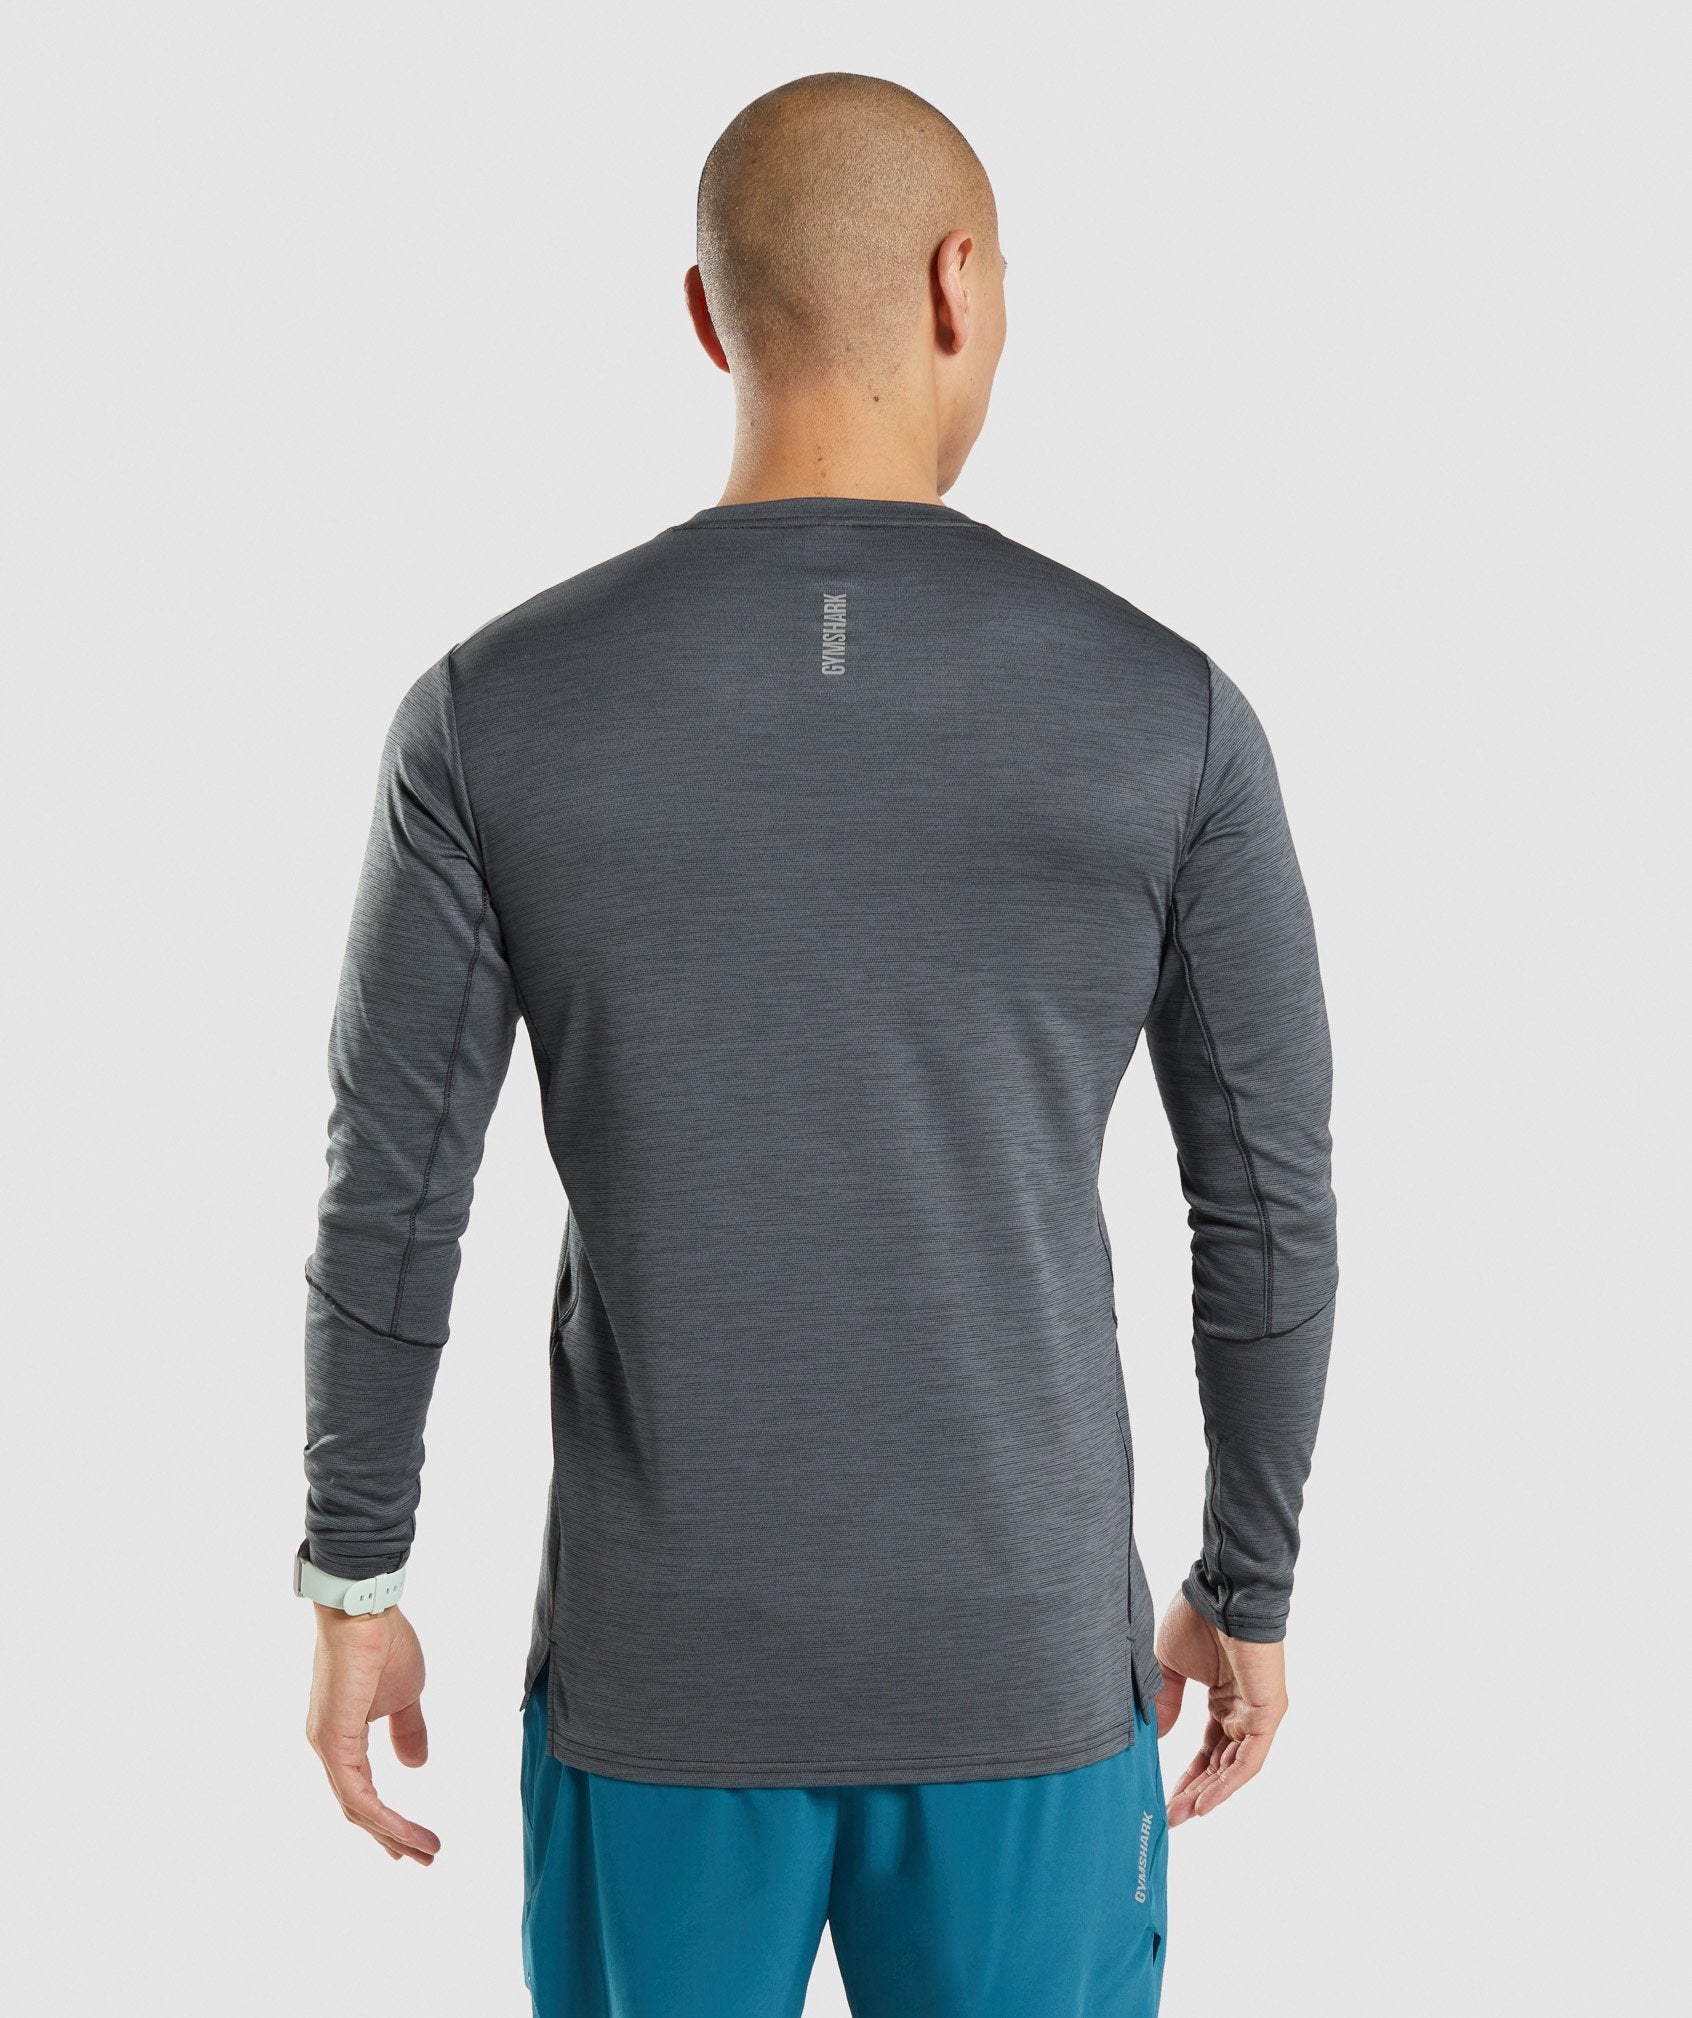 Speed Long Sleeve T-Shirt in Black/Charcoal Marl - view 3